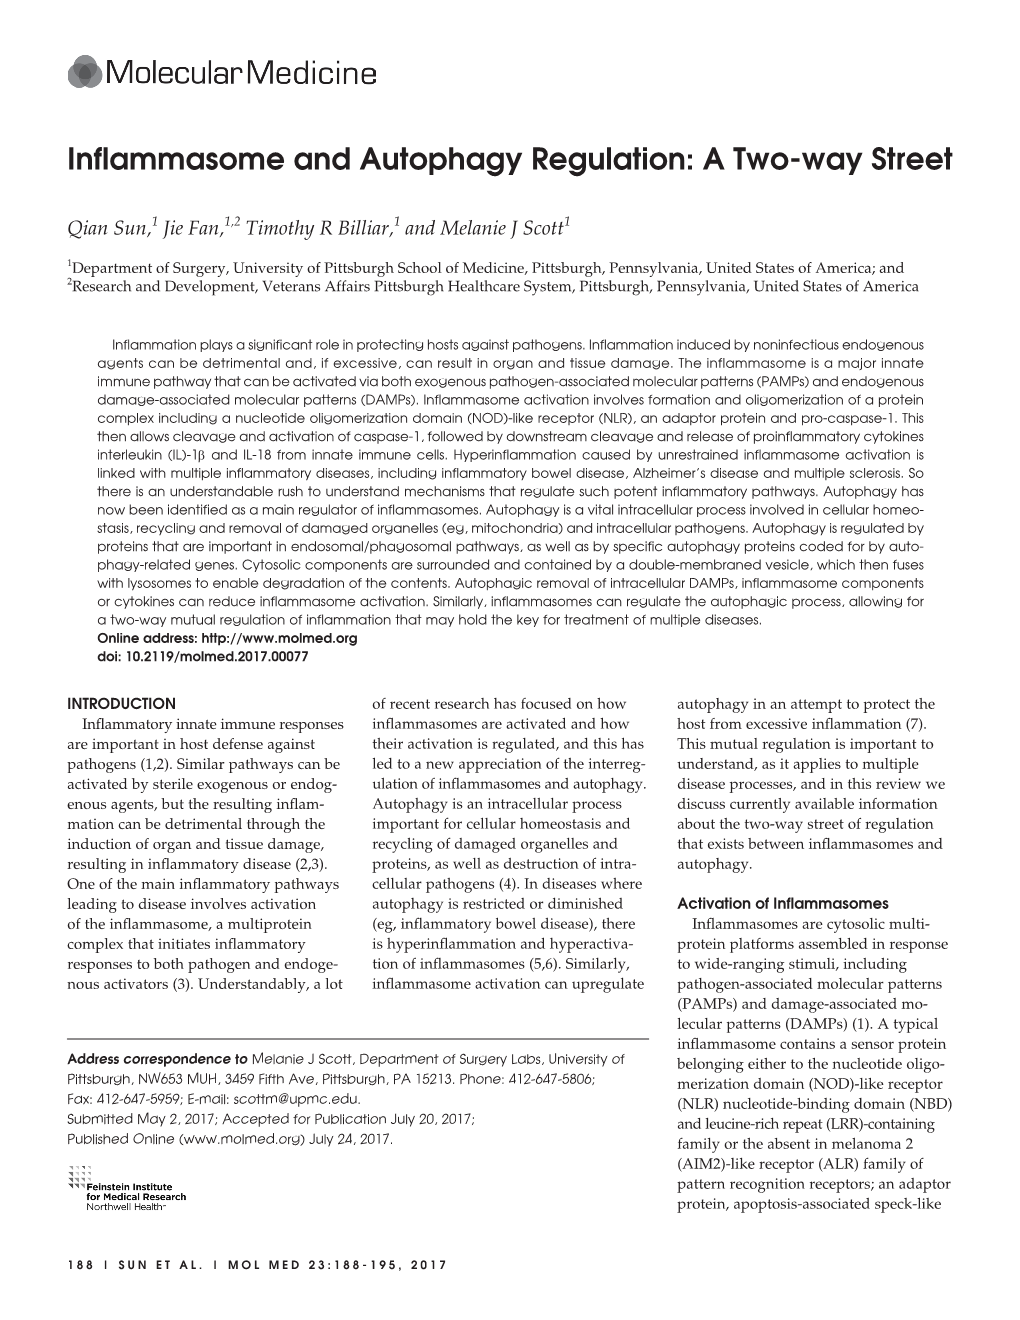 Inflammasome and Autophagy Regulation: a Two-Way Street